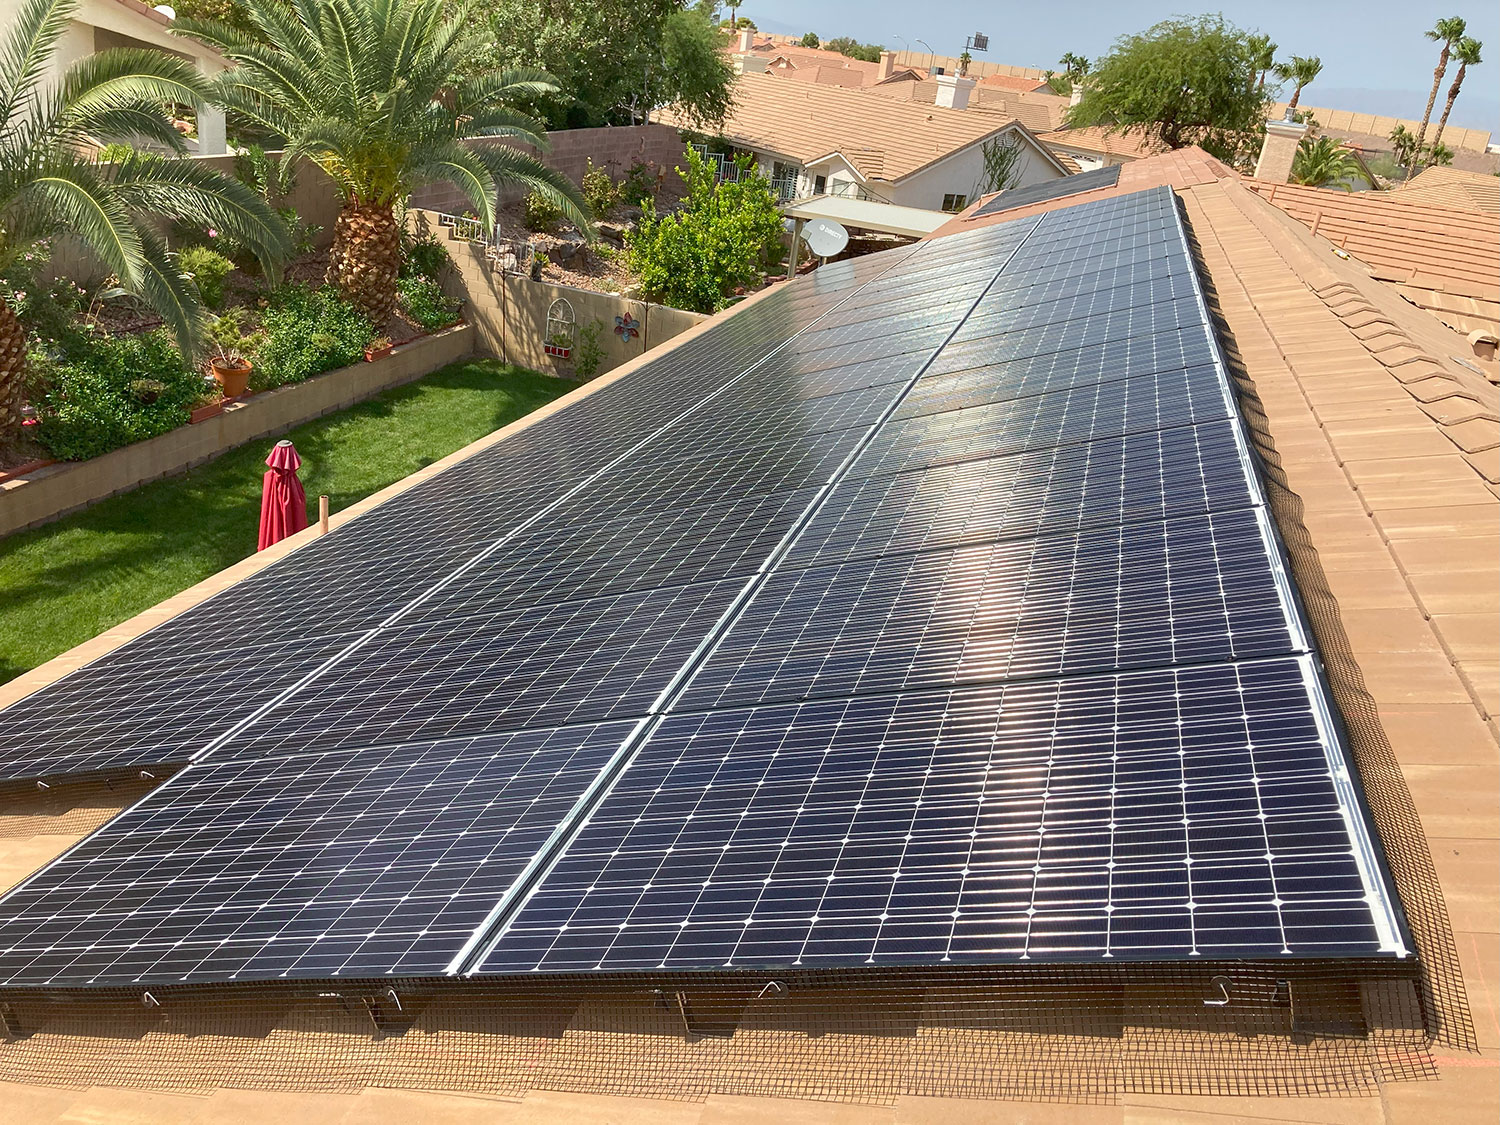 Sol-Up, solar services, Green Valley North, Southern Nevada, renewable energy, solar panel installation, Mojave Desert, hot desert climate, energy efficiency, sustainable living, clean energy, reduce carbon footprint, lower energy bills, solar revolution